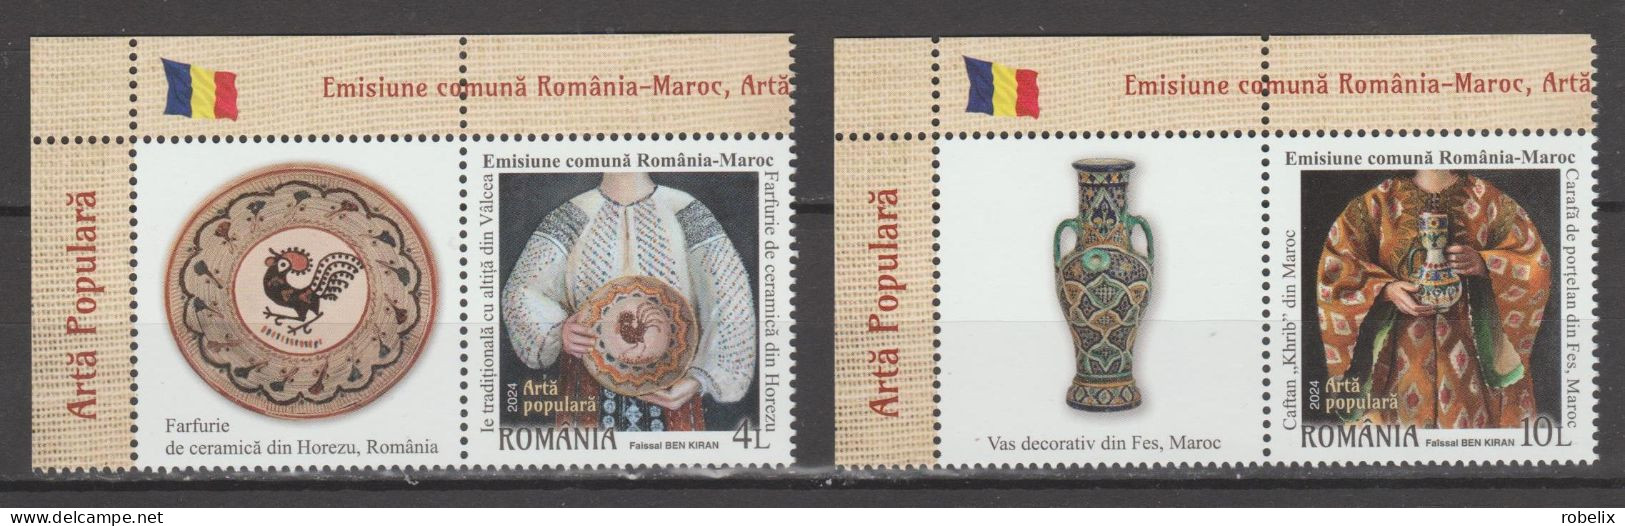 ROMANIA 2024 JOINT ISSUE ROMANIA - MAROC (MOROCCO) - Folk Art  Set Of 2 Stamps With Labels Type 1  MNH** - Emissions Communes